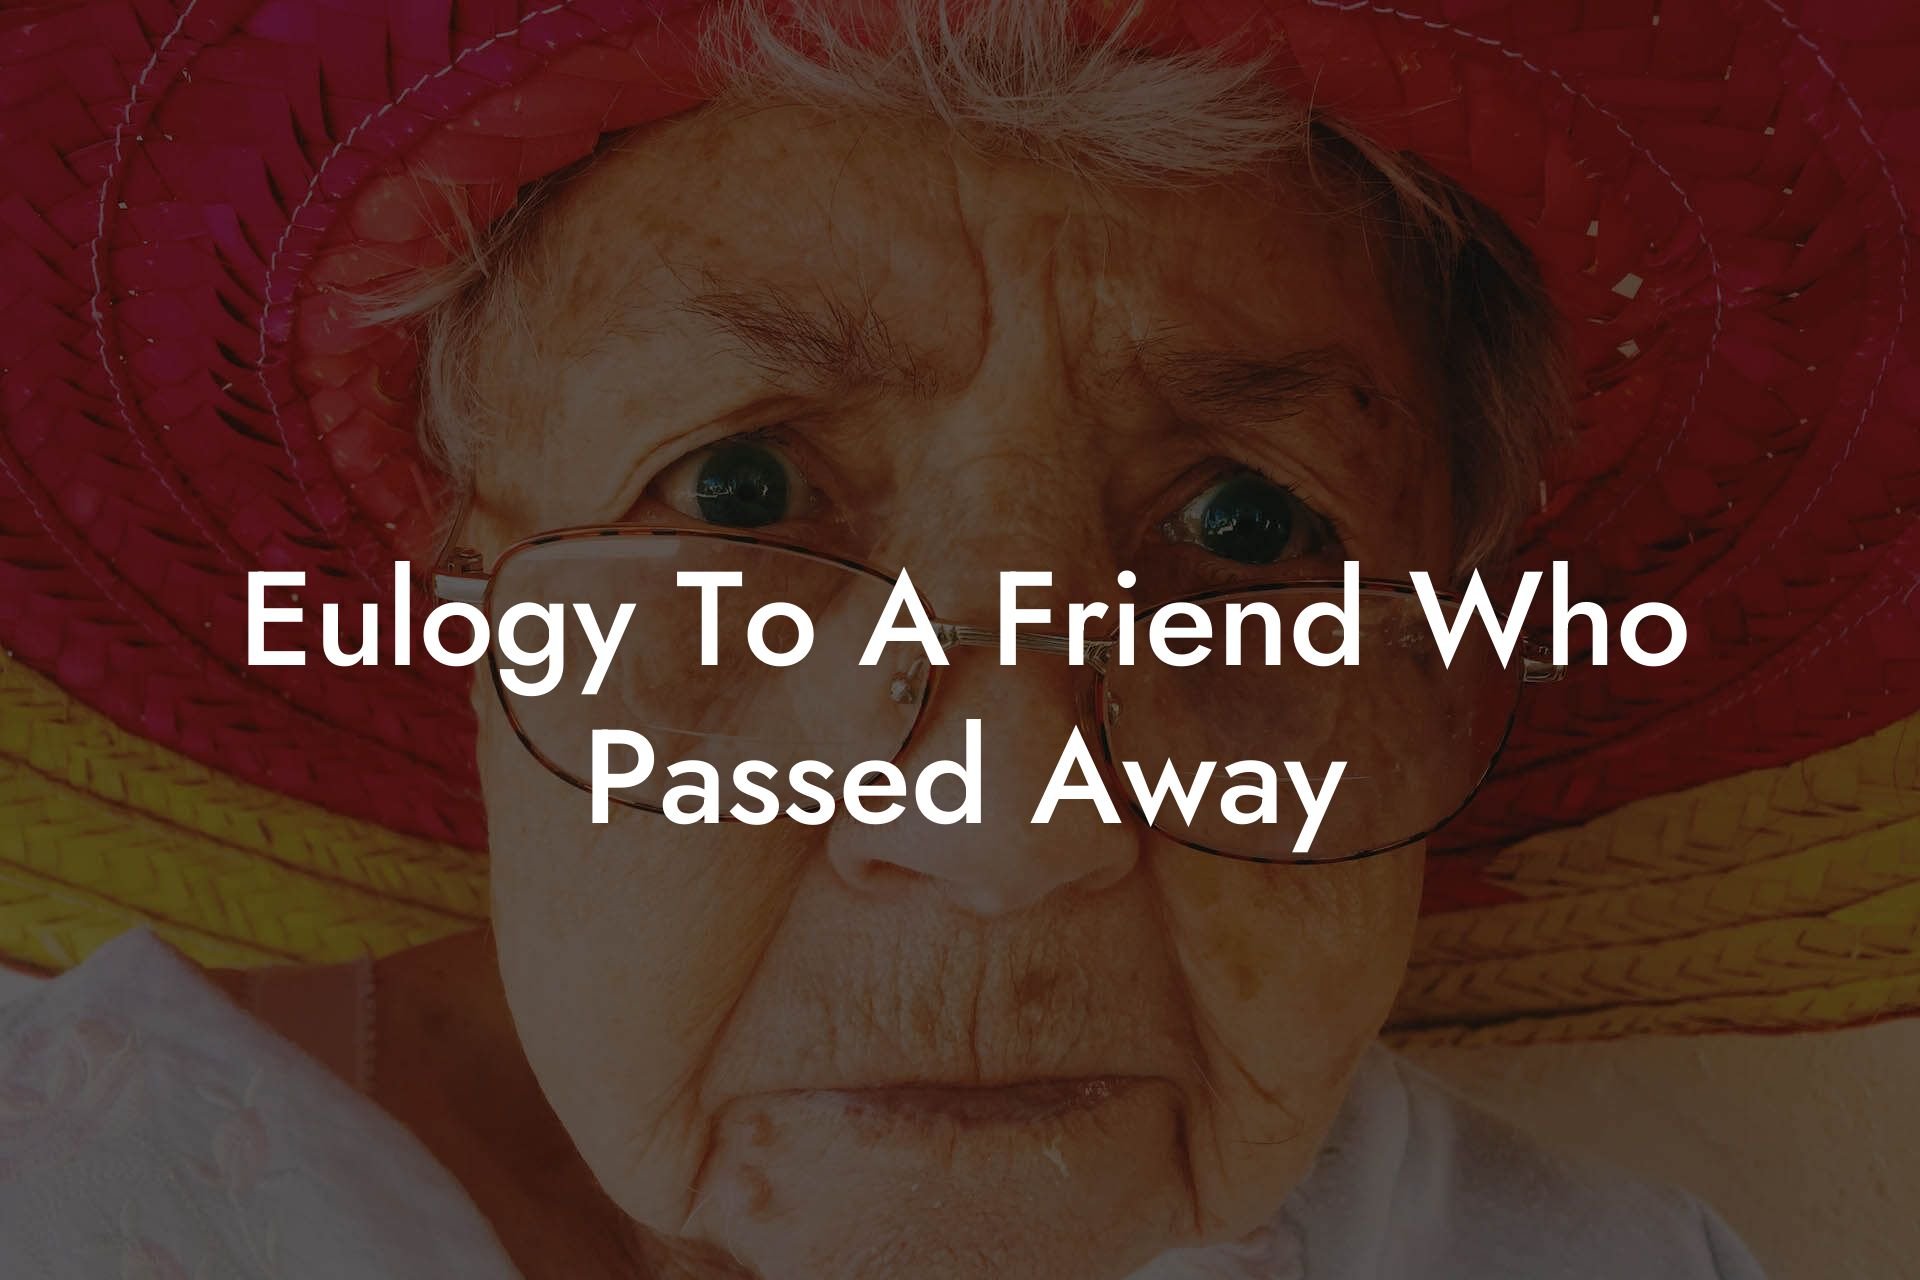 Eulogy To A Friend Who Passed Away